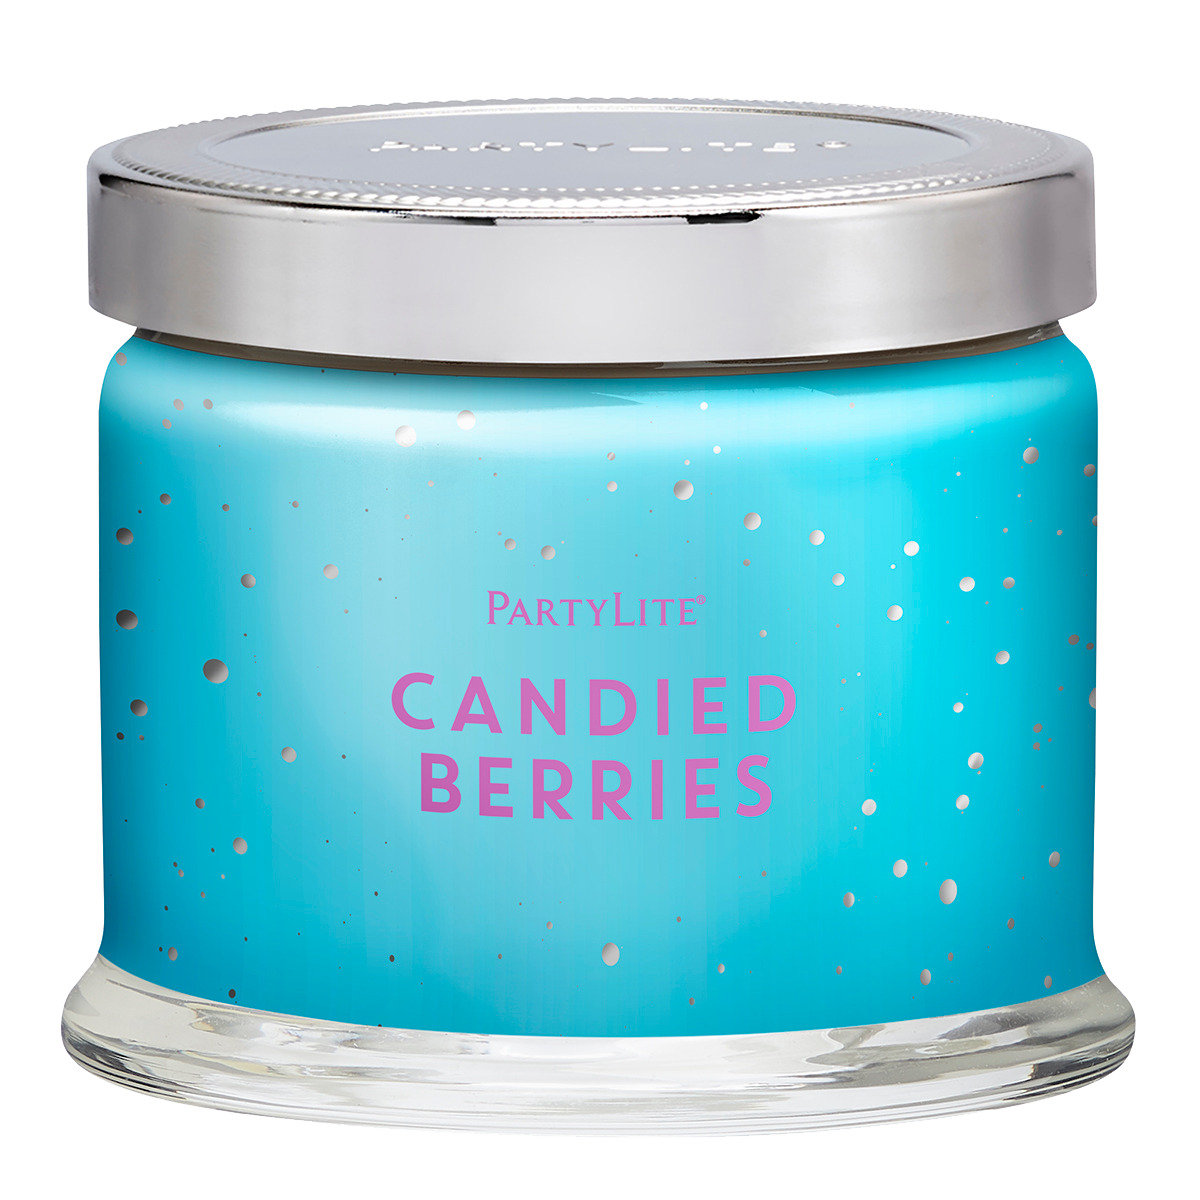 Candied Berries 3-Wick Scented Jar Candle